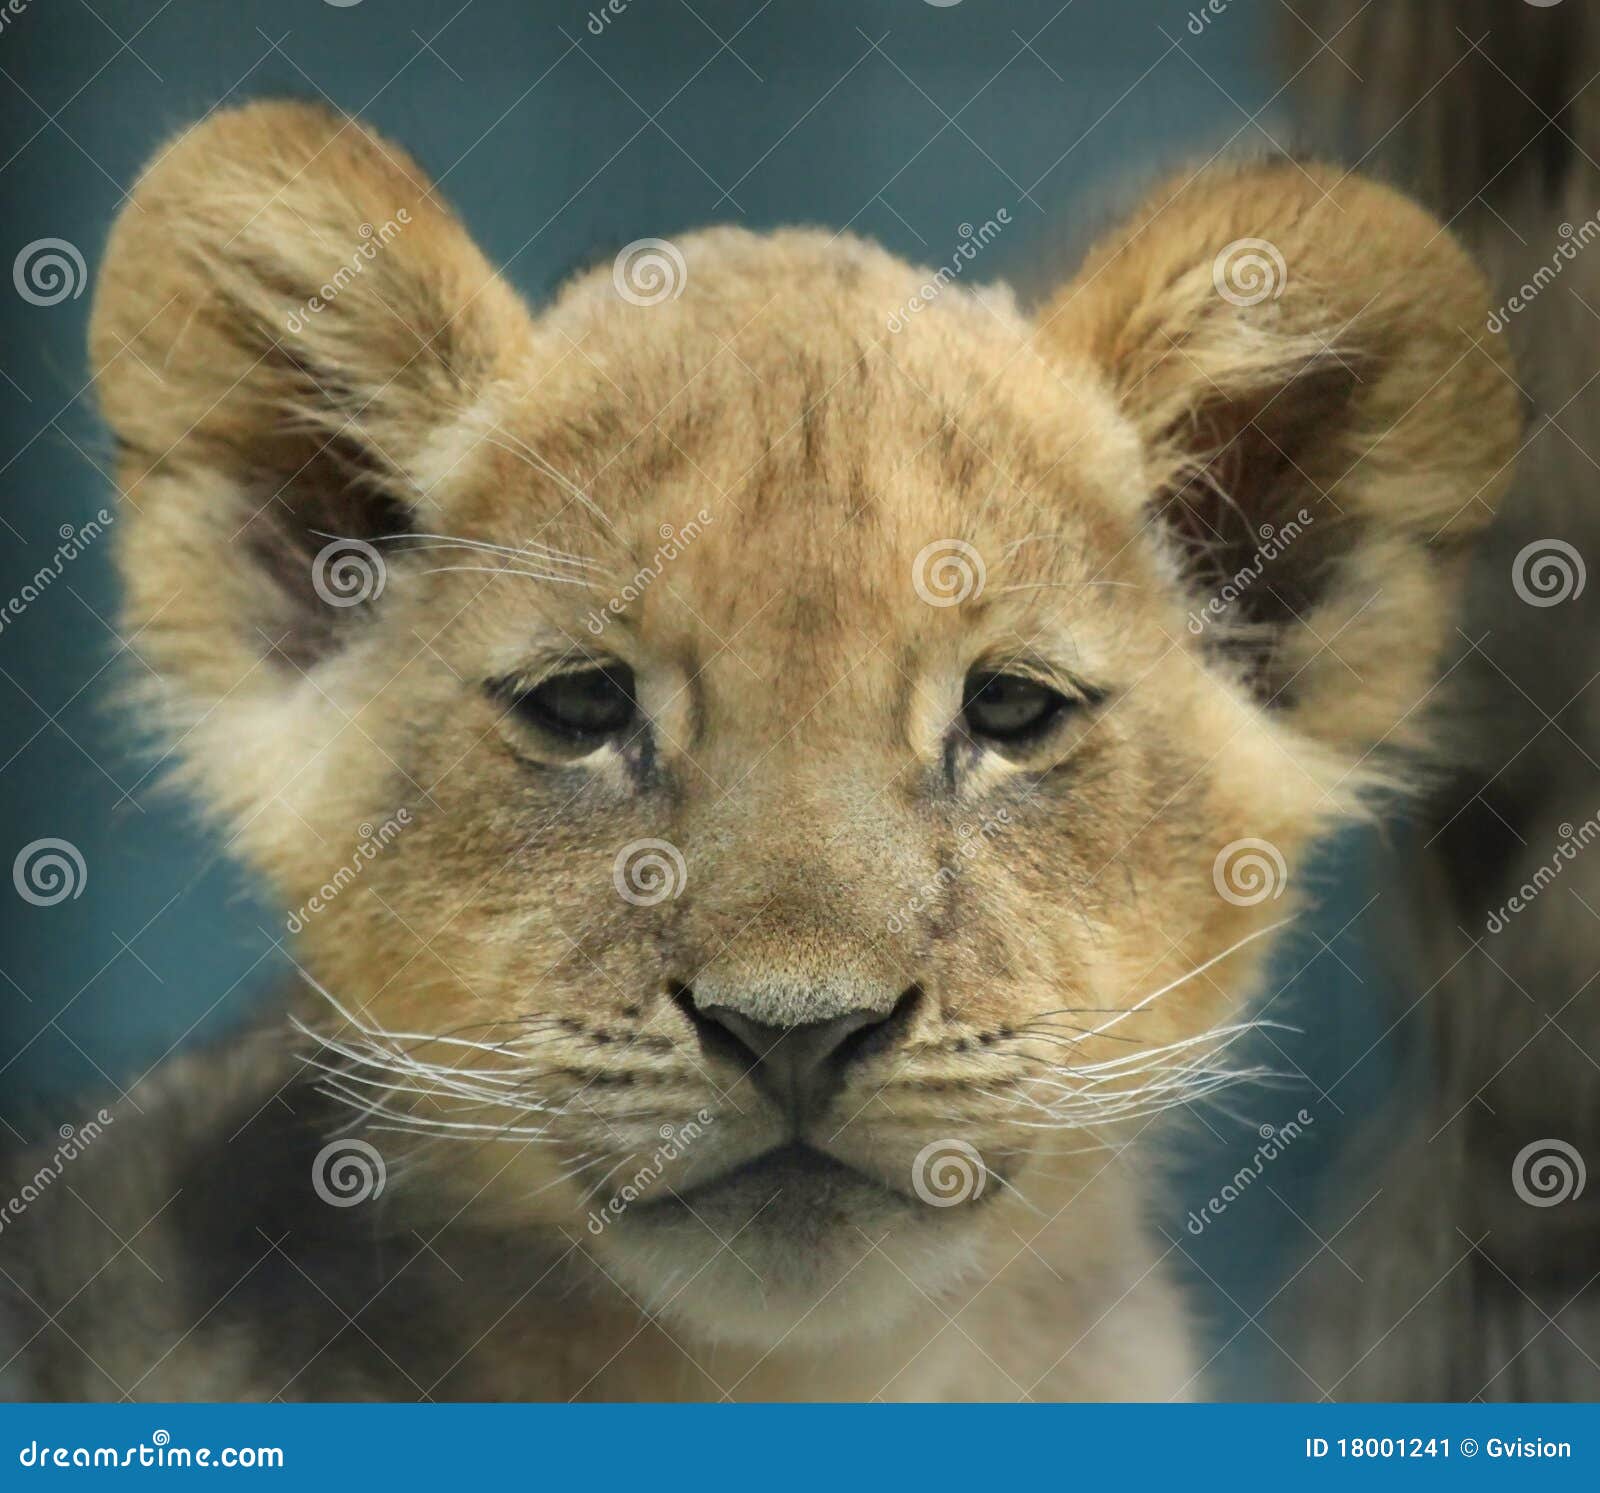 2 047 Sweet Lion Photos Free Royalty Free Stock Photos From Dreamstime